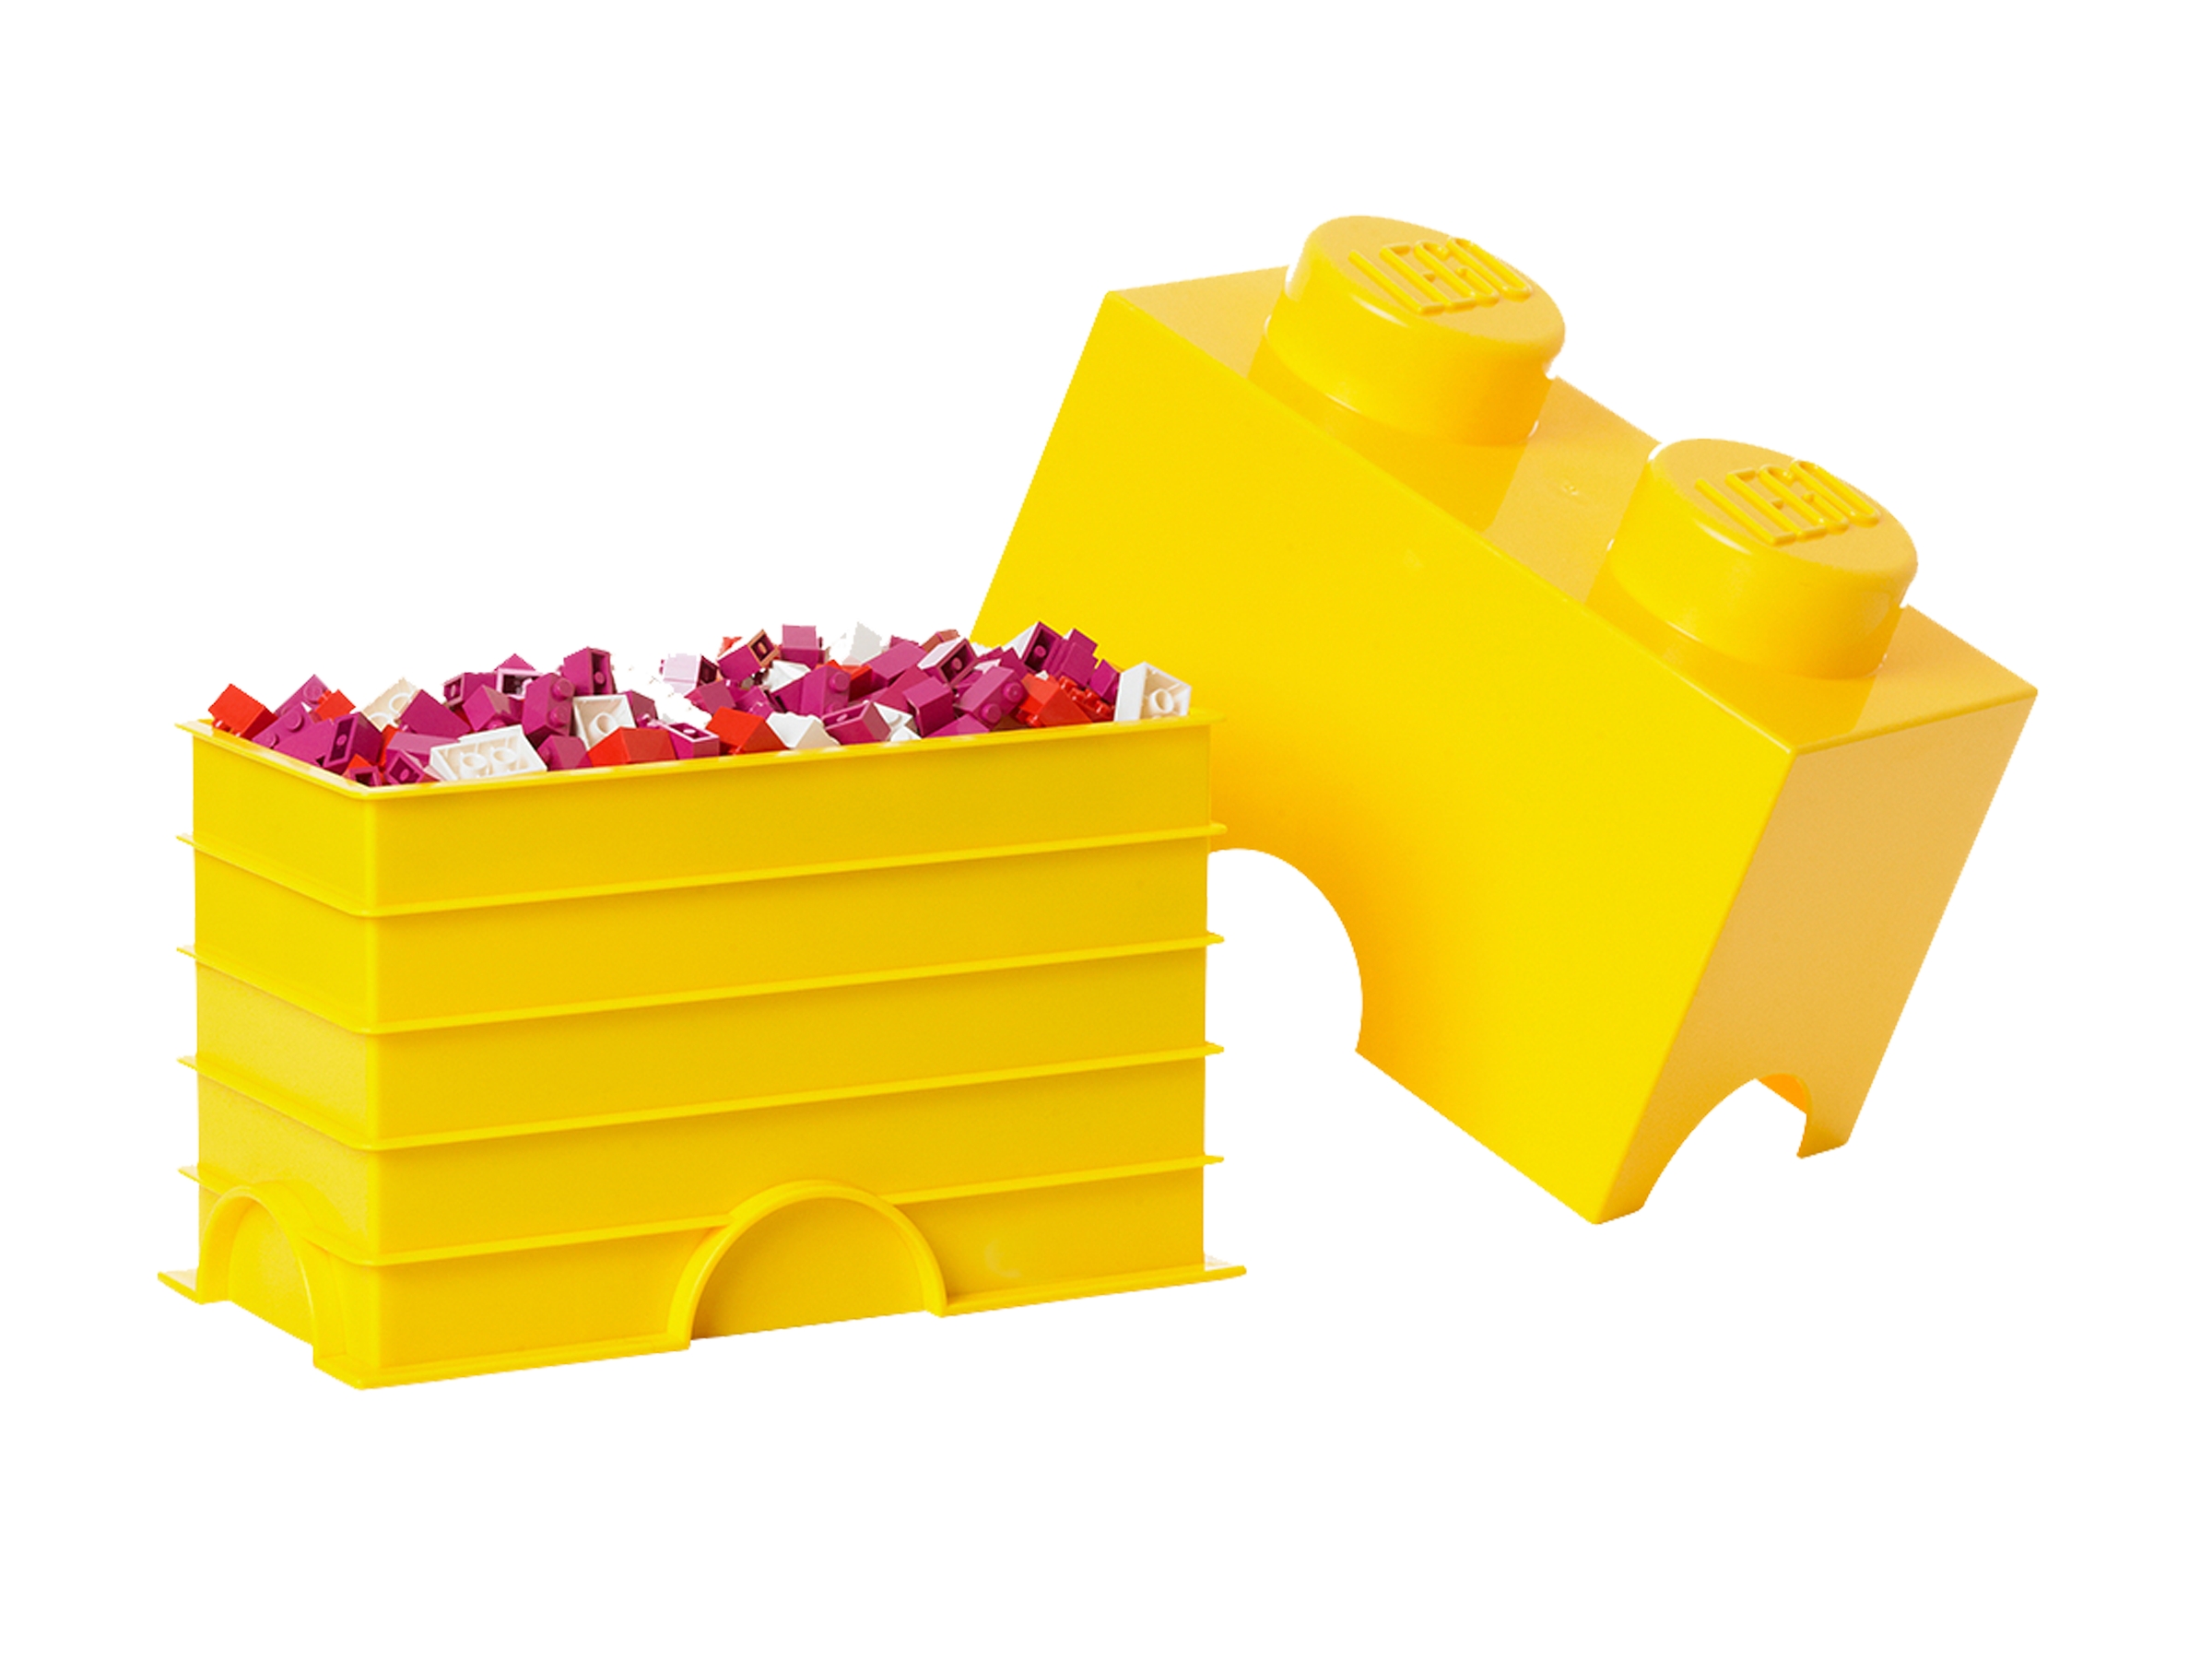 Bricksters™: LEGO® Shop in Shops